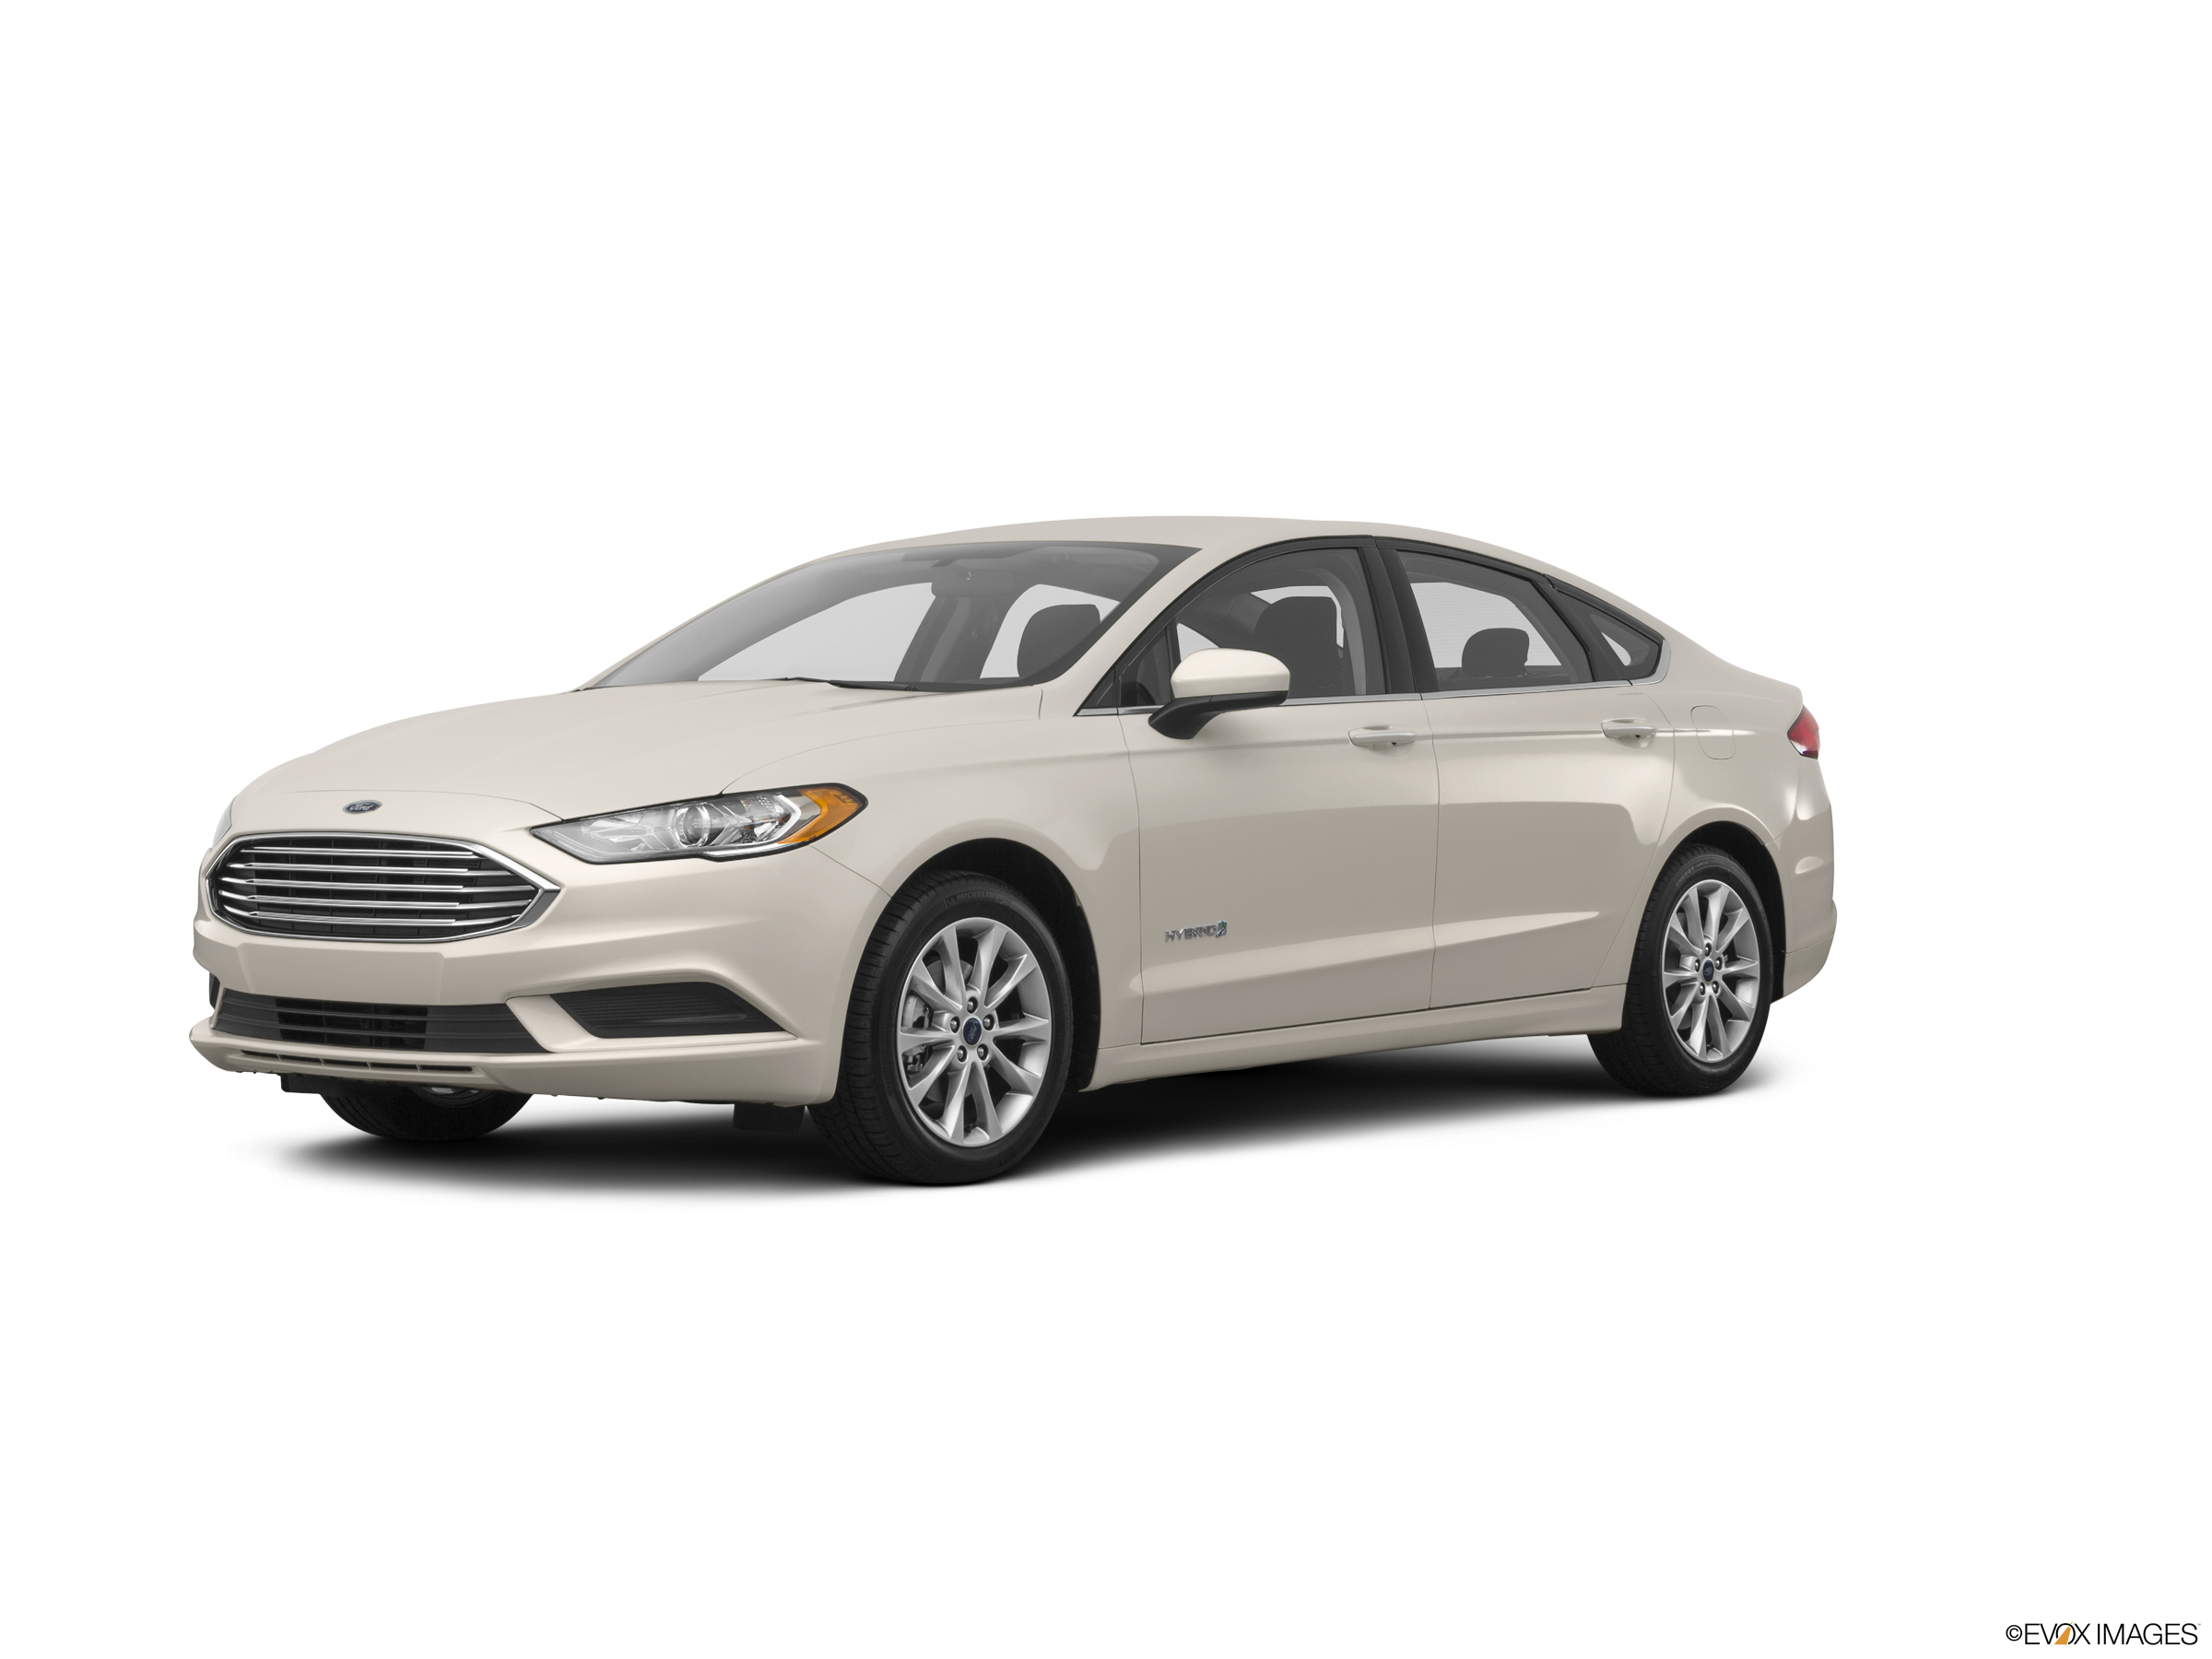 2018 Ford Fusion Hybrid Review & Ratings